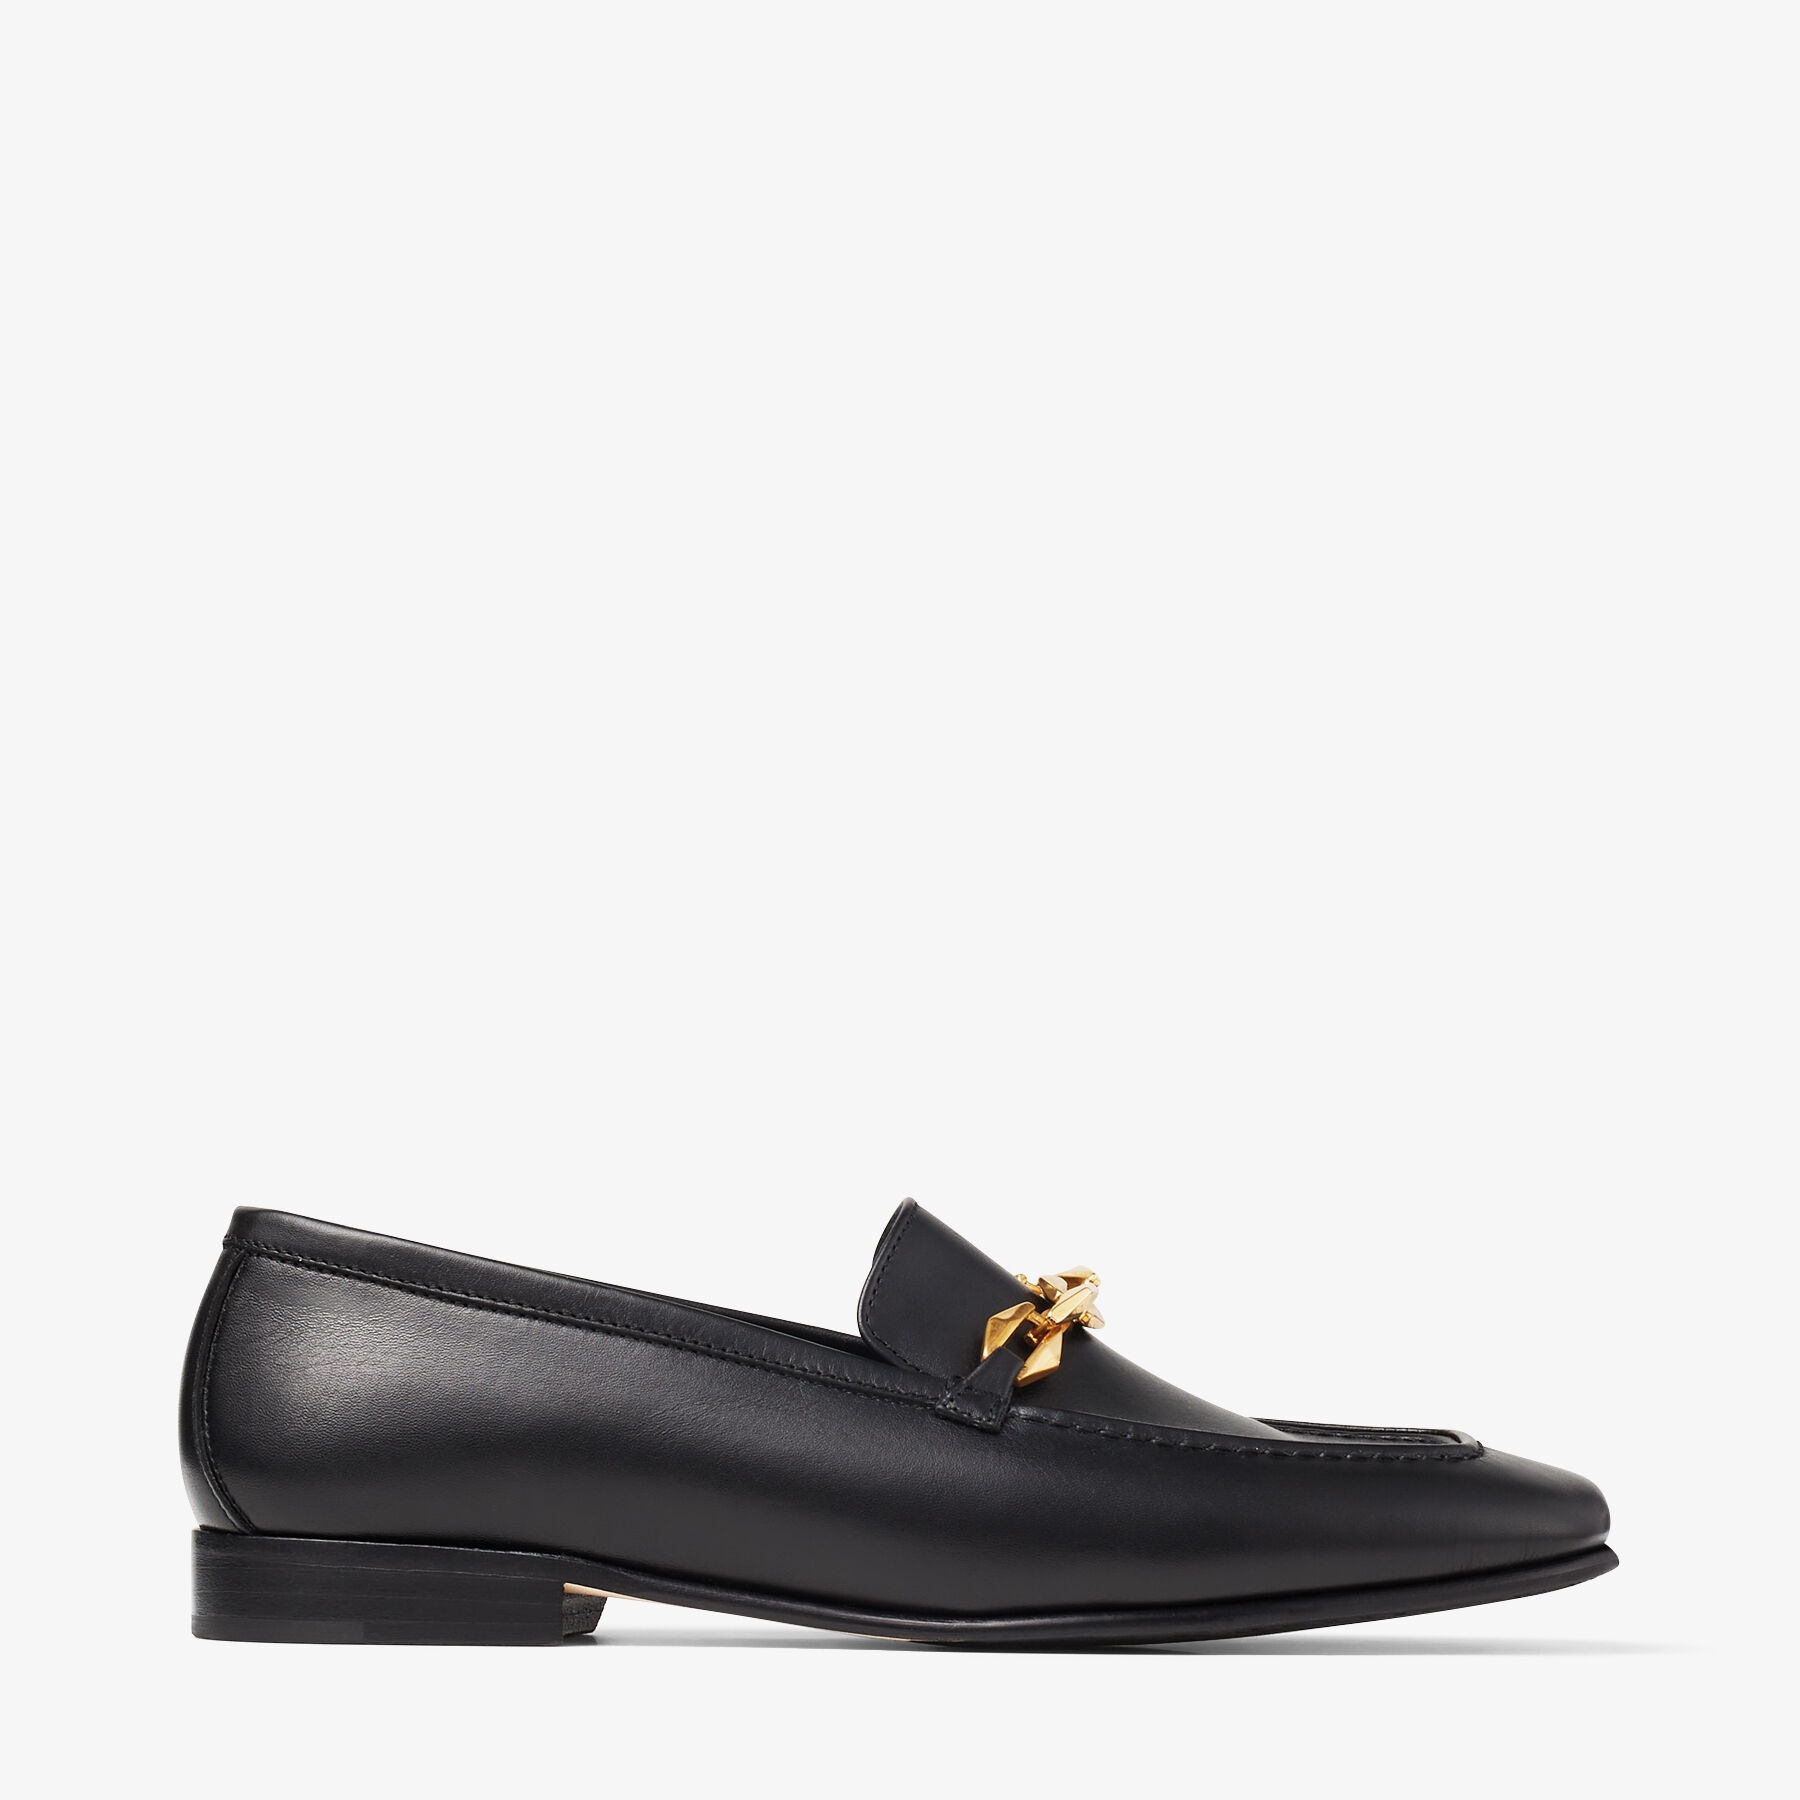 Diamond Tilda Loafer
Black Calf Leather Loafers with Chain Embellishment - 1